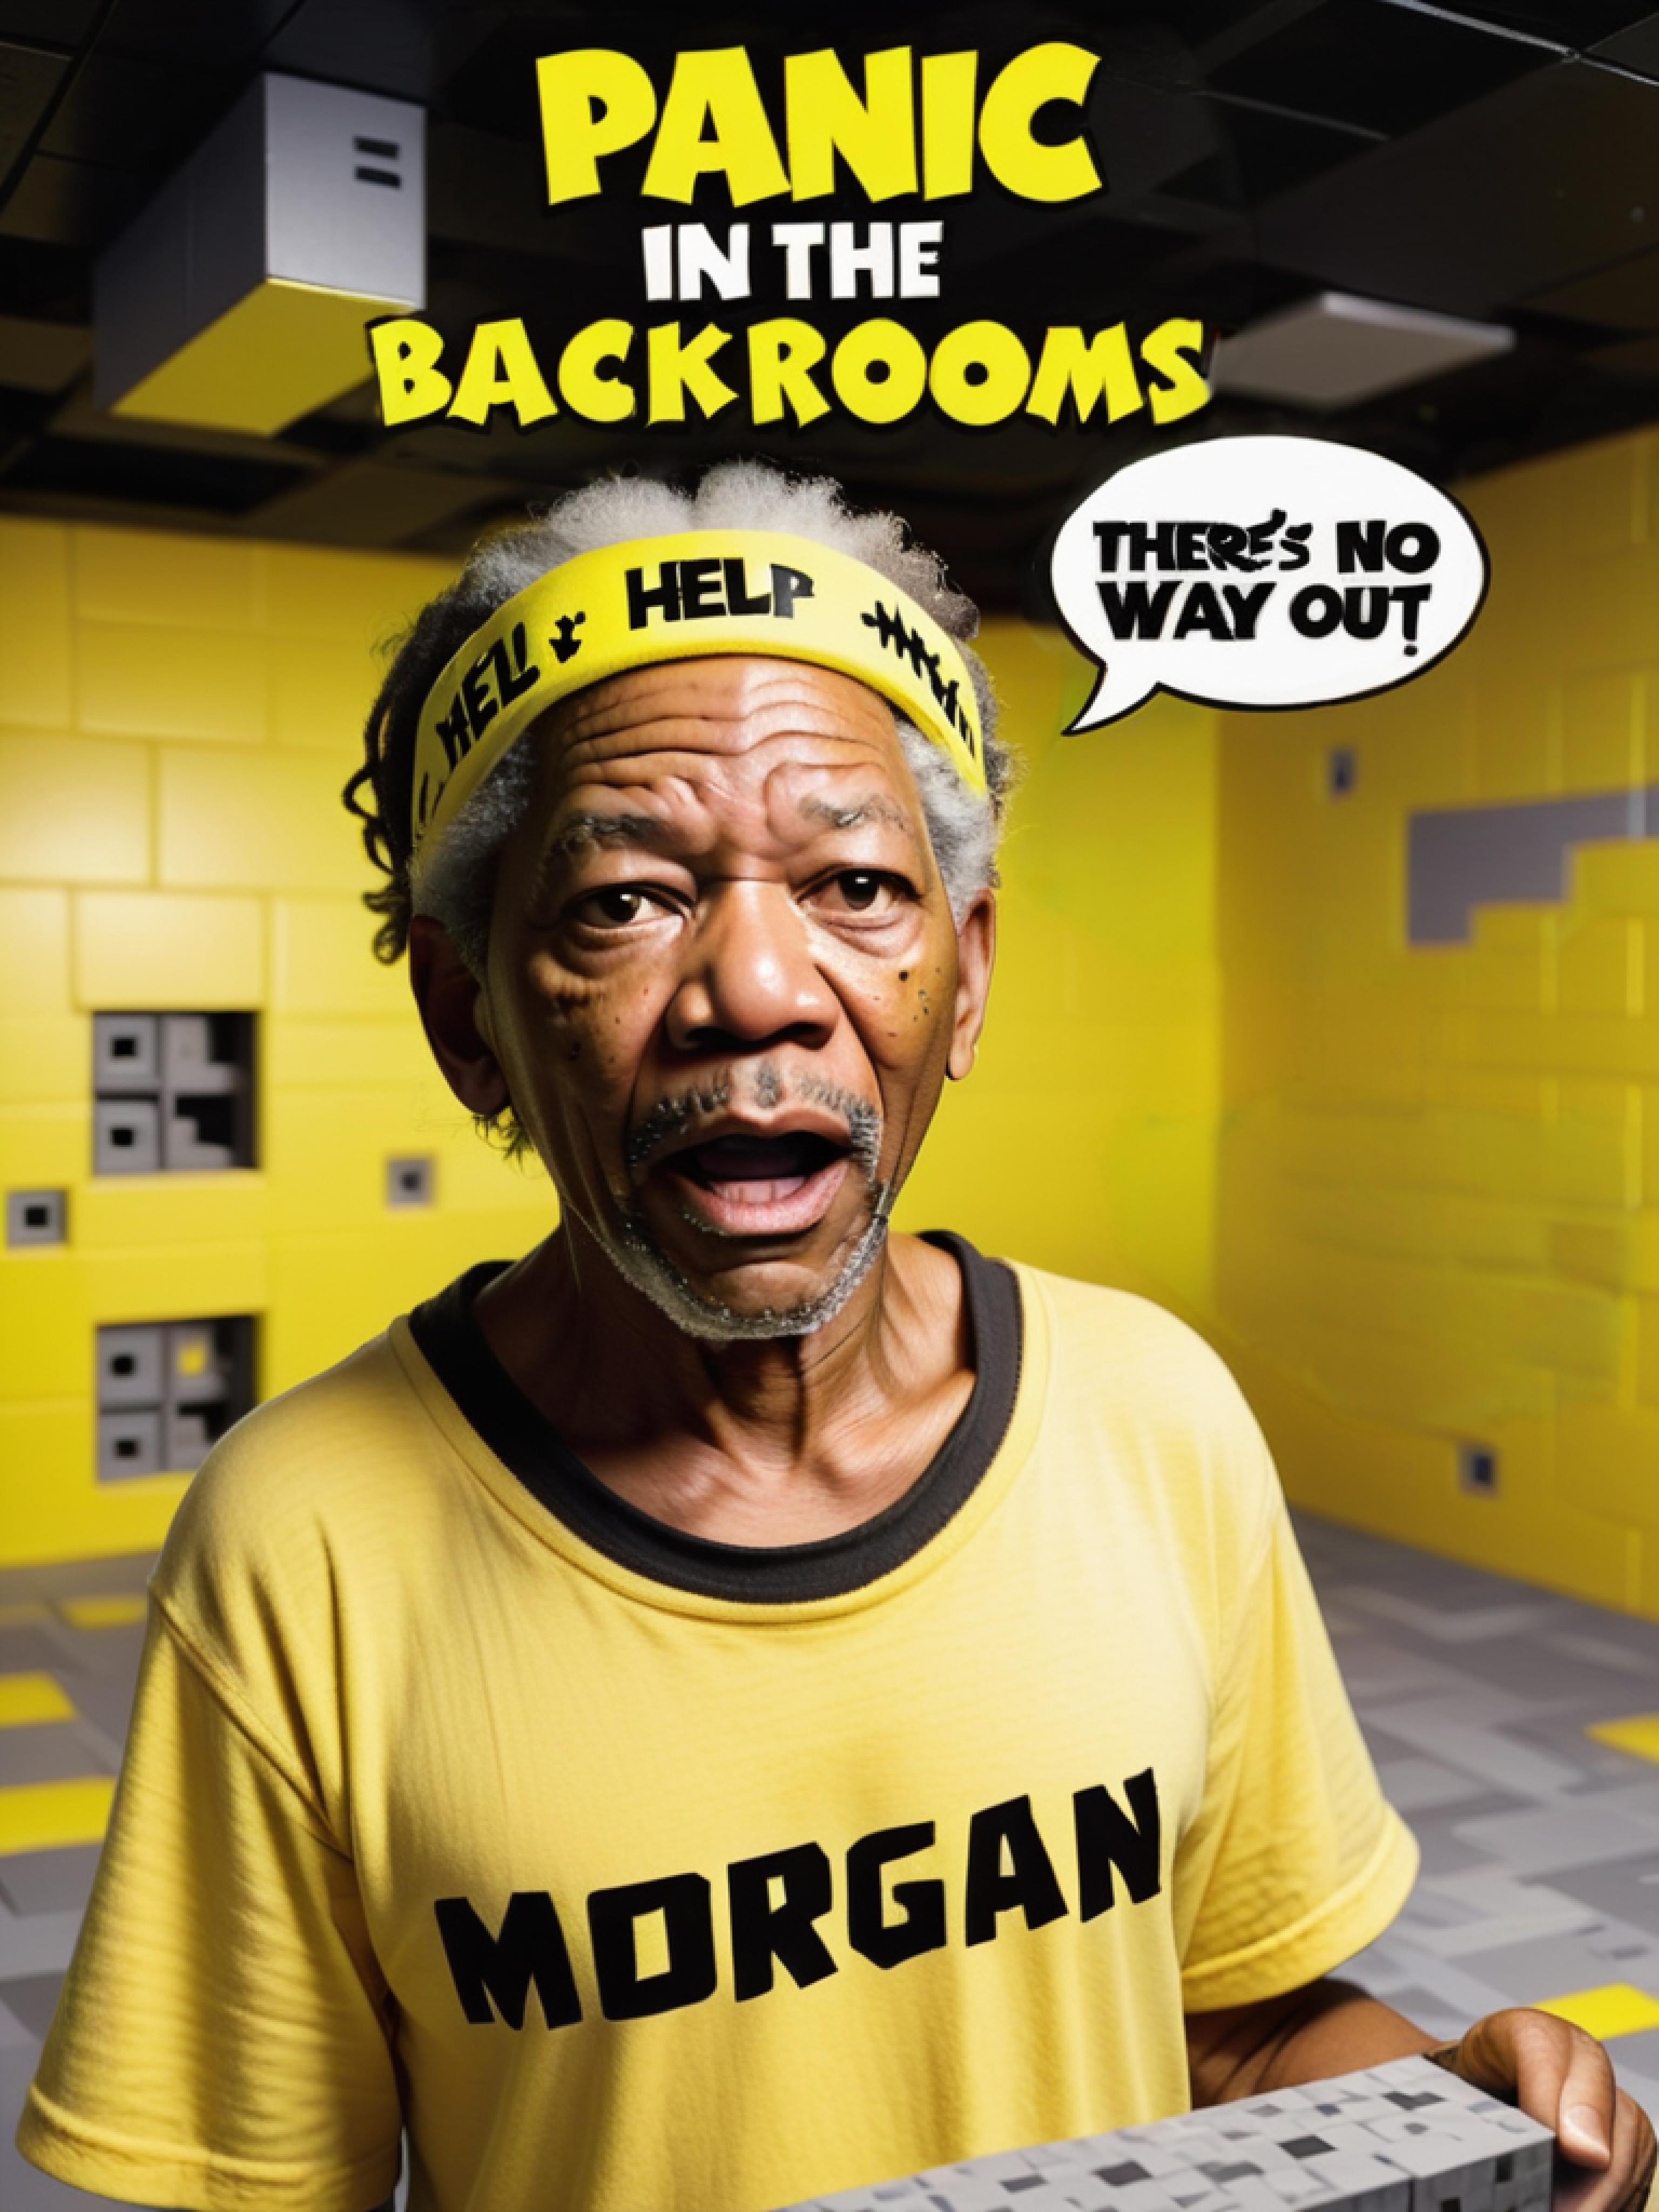 Morgan in the Backroom: A Comic Strip with a Yellow Background